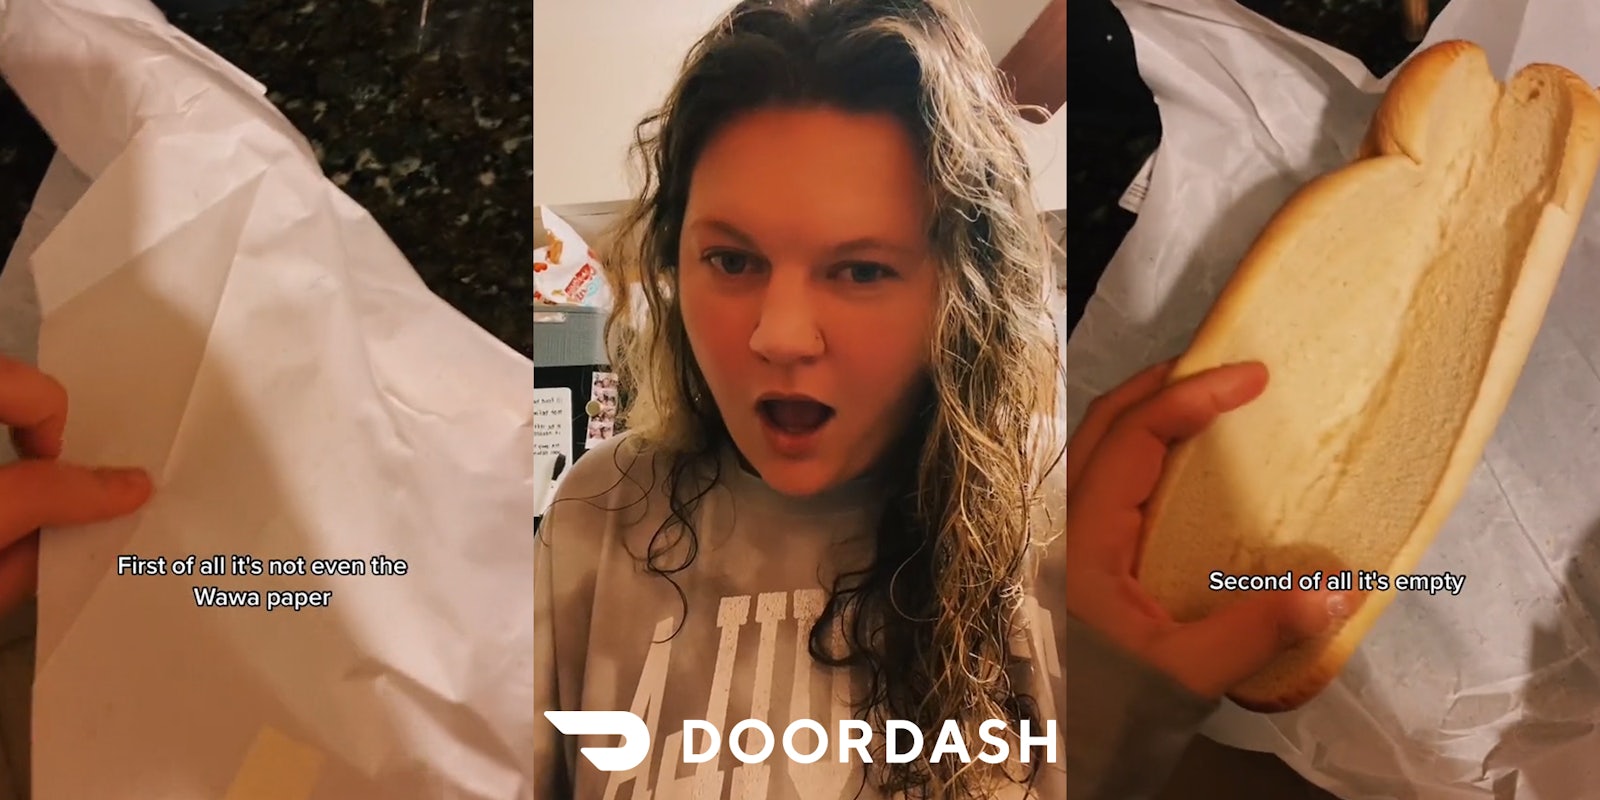 sub paper with hand holding edge on countertop caption 'First of all it's not even the Wawa paper' (l) woman speaking with DoorDash white logo at bottom (c) hand spreading sub roll open to reveal empty inside caption 'Second of all it's empty' (r)